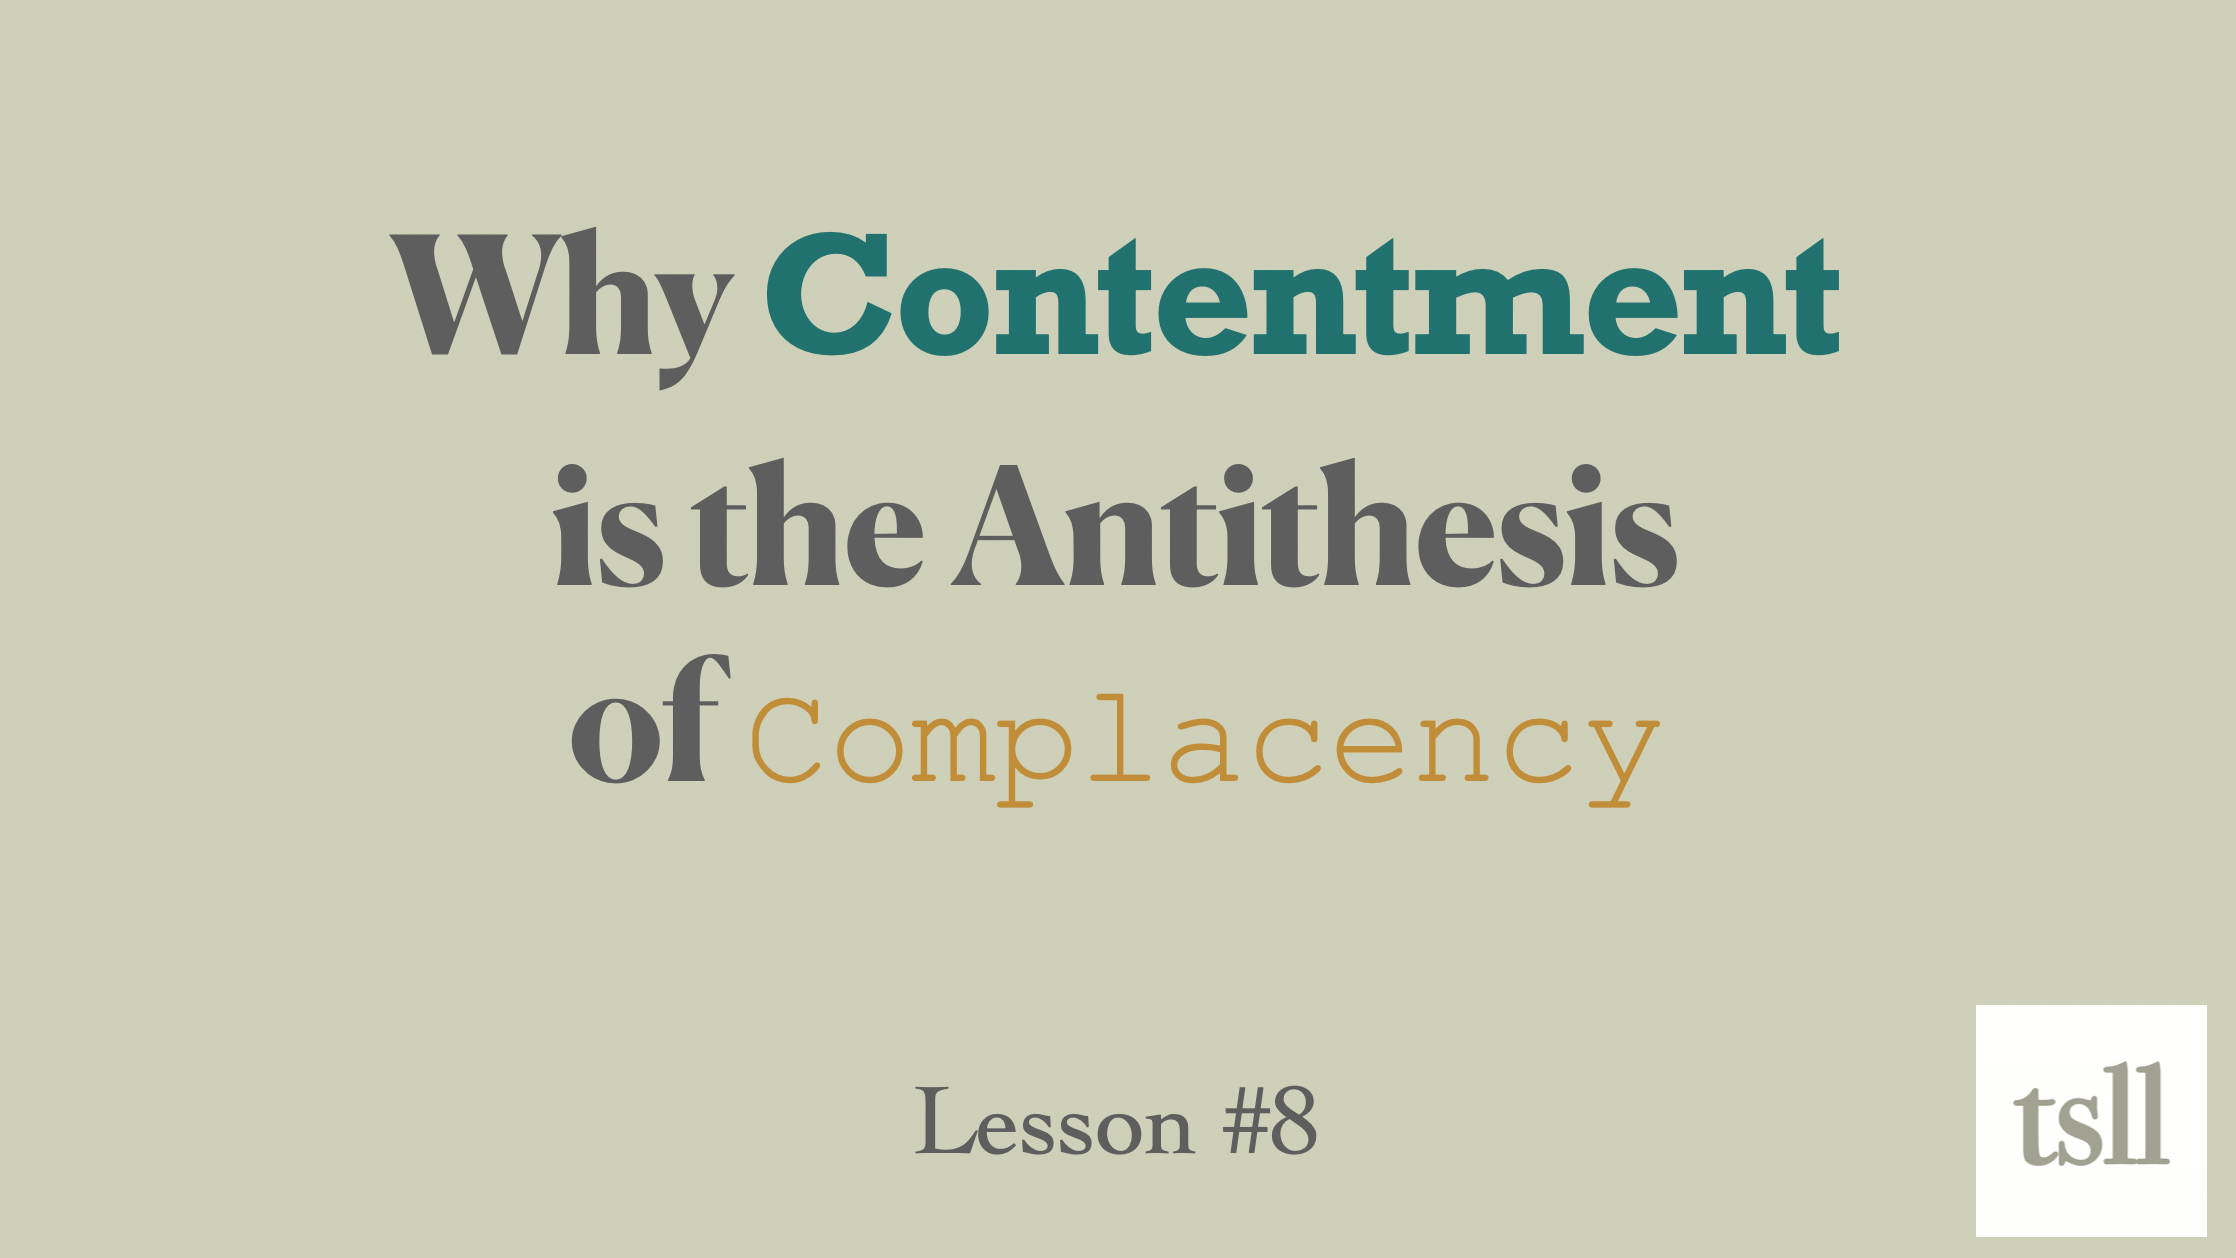 Part 4: Contentment is the Antithesis of Complacency, (18:06)